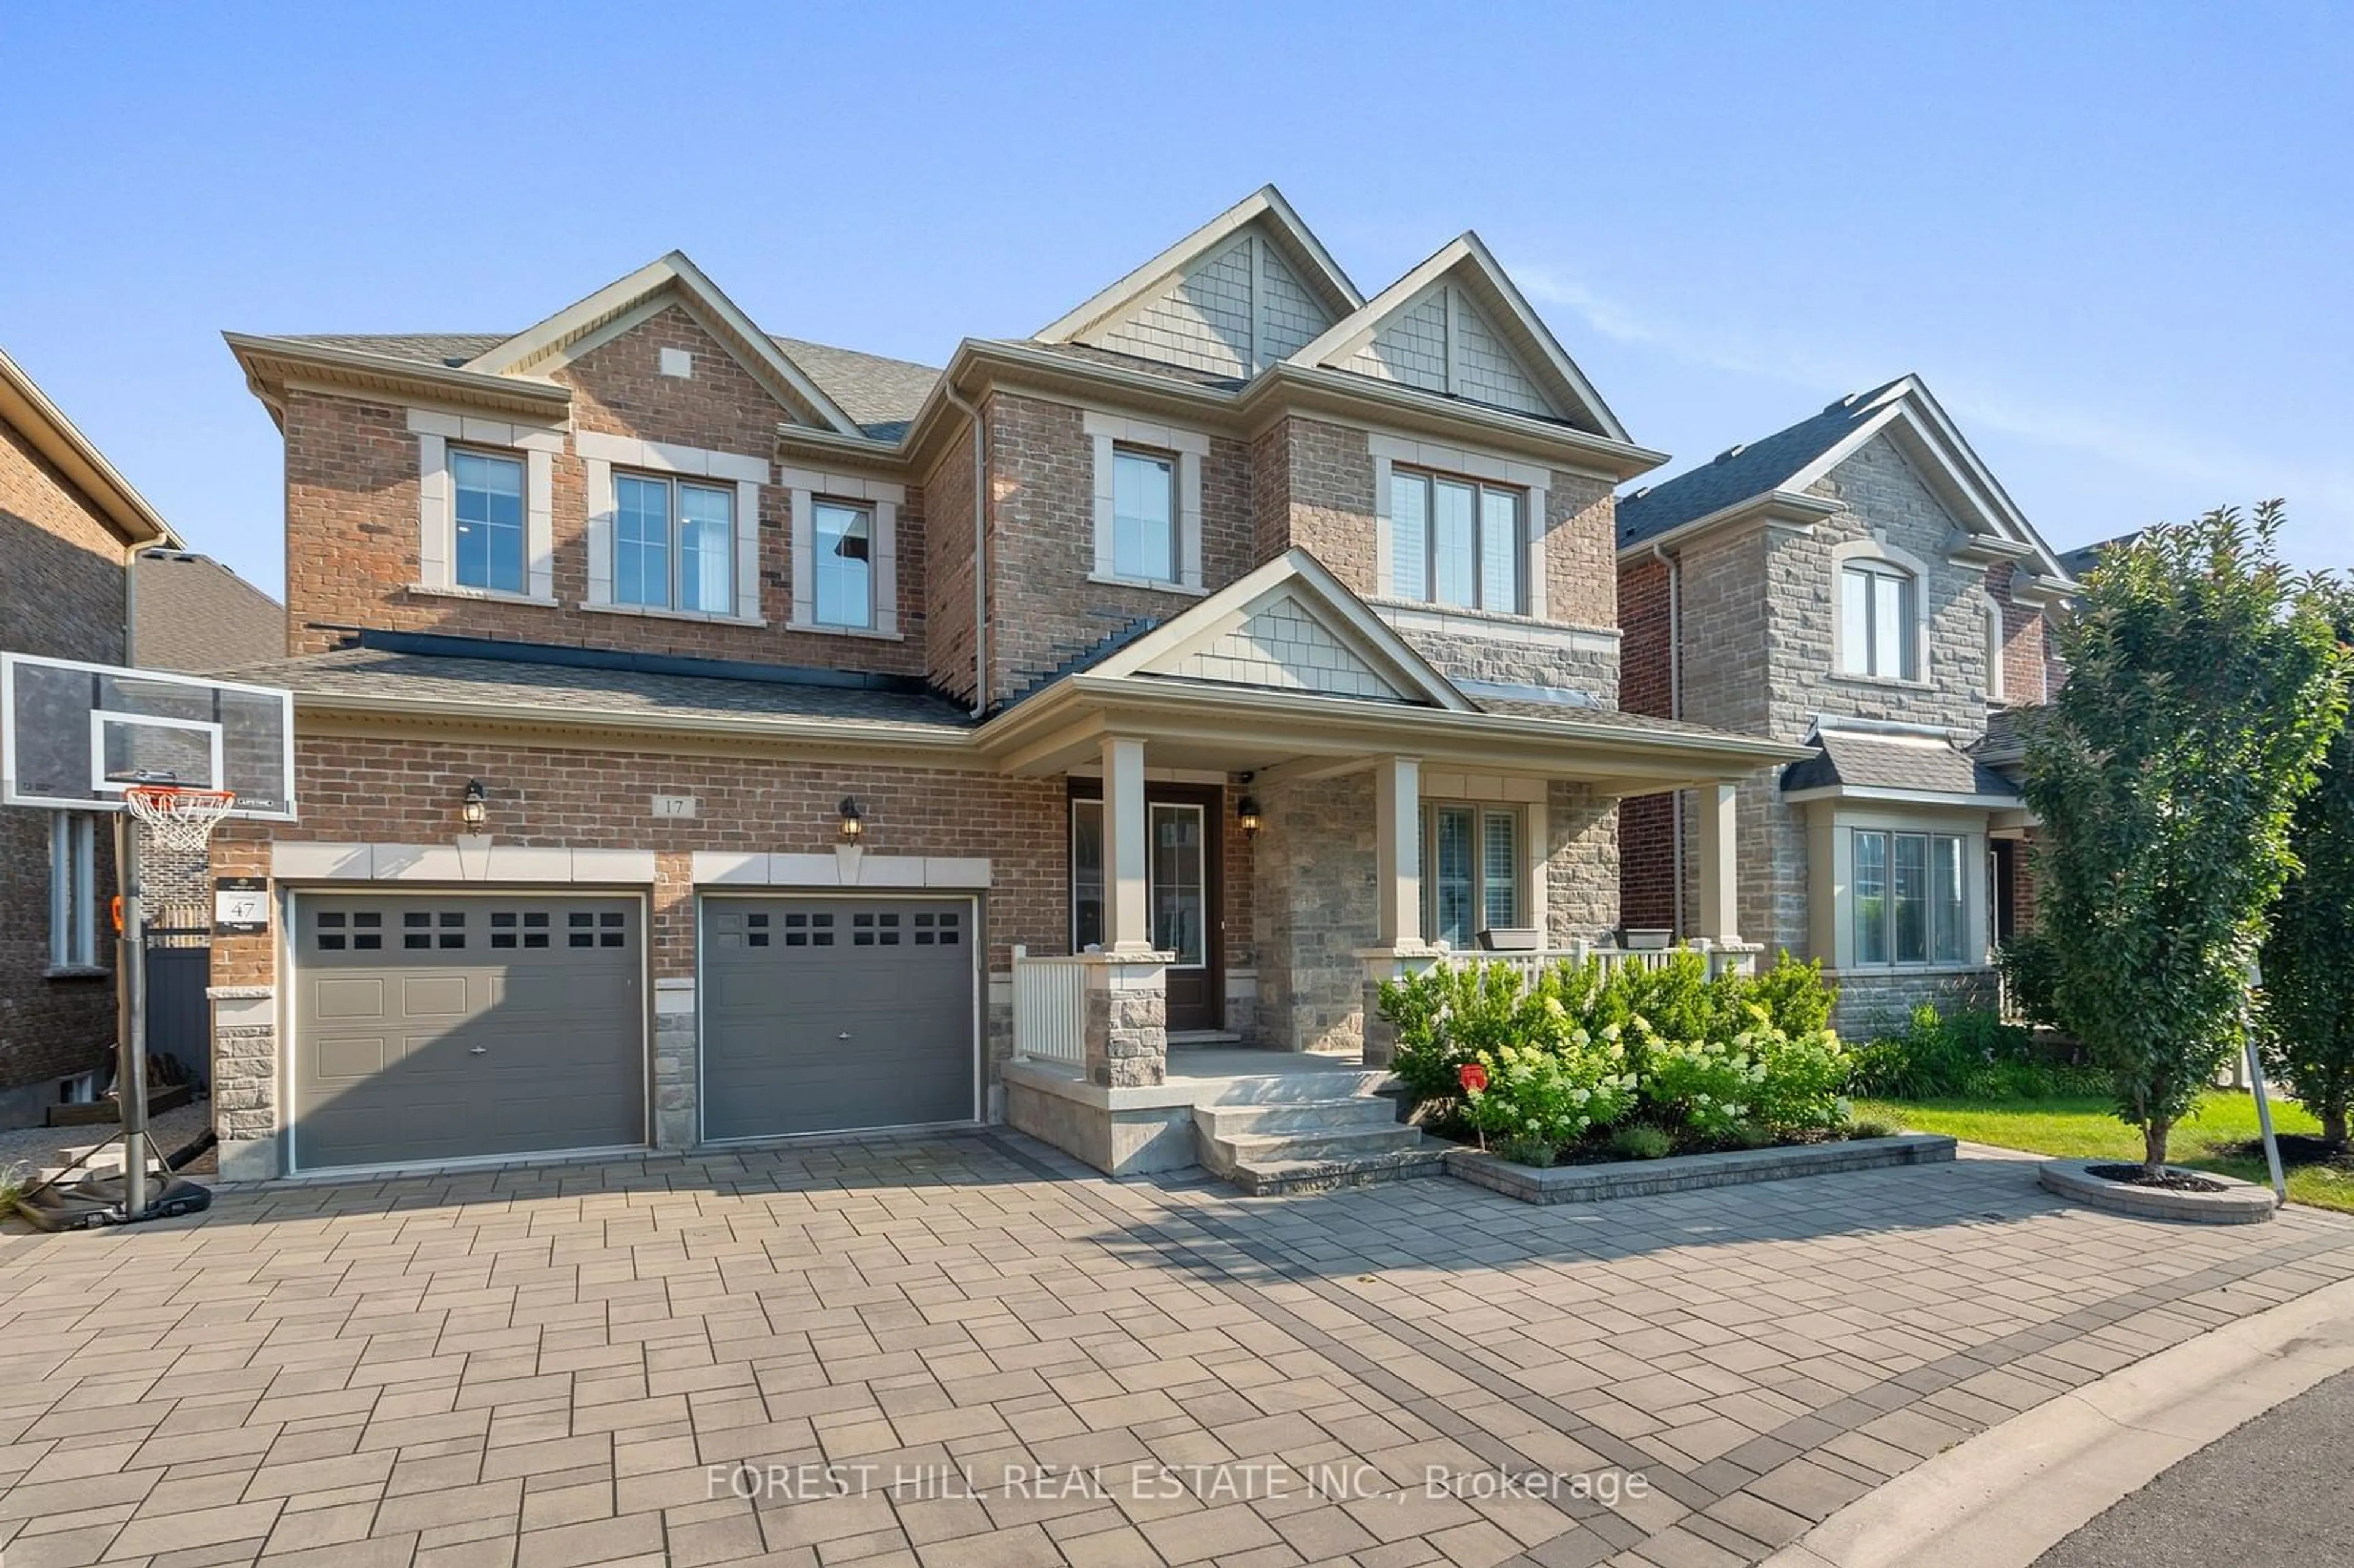 Home with brick exterior material for 17 Ken Sinclair Cres, Aurora Ontario L4G 3J1